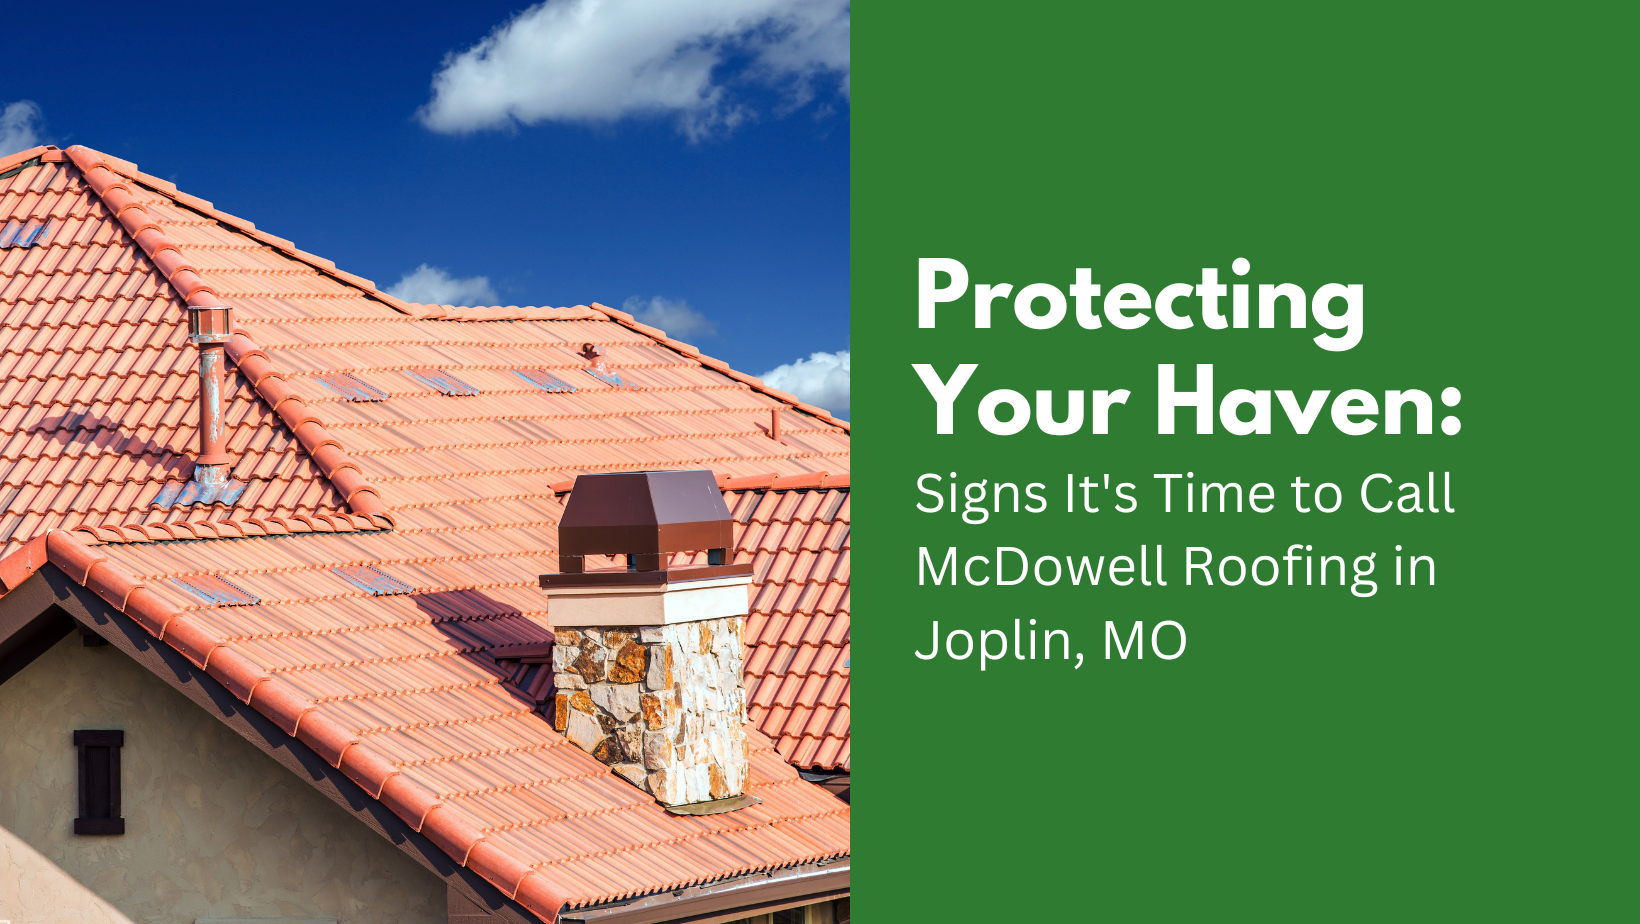 Protecting Your Haven: Signs It's Time to Call McDowell Roofing in Joplin, MO